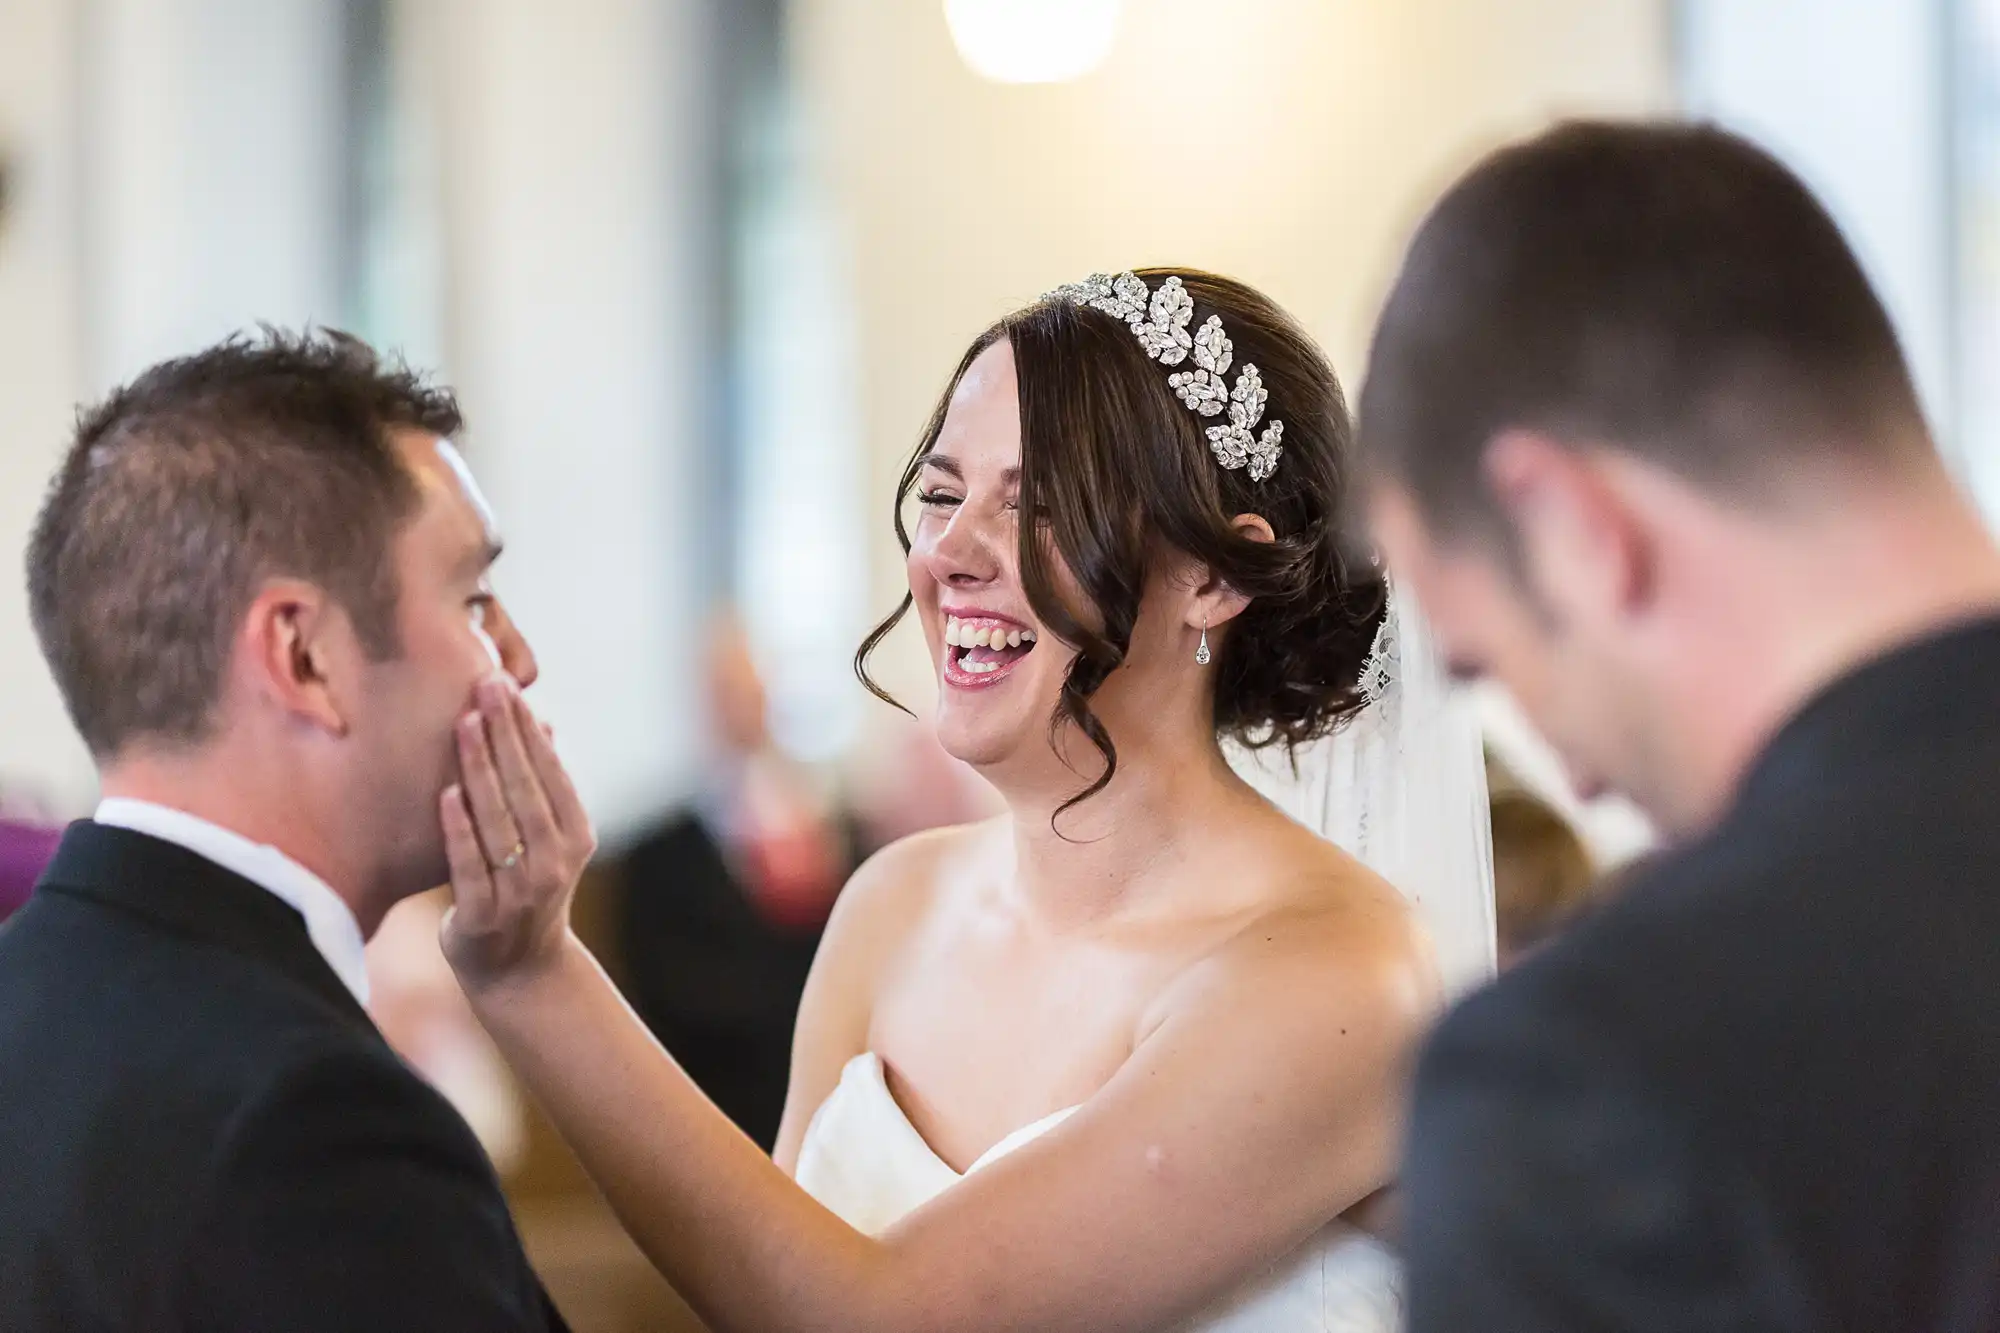 Bride laughing while touching a man's face, another man in foreground, indoors at a wedding reception.